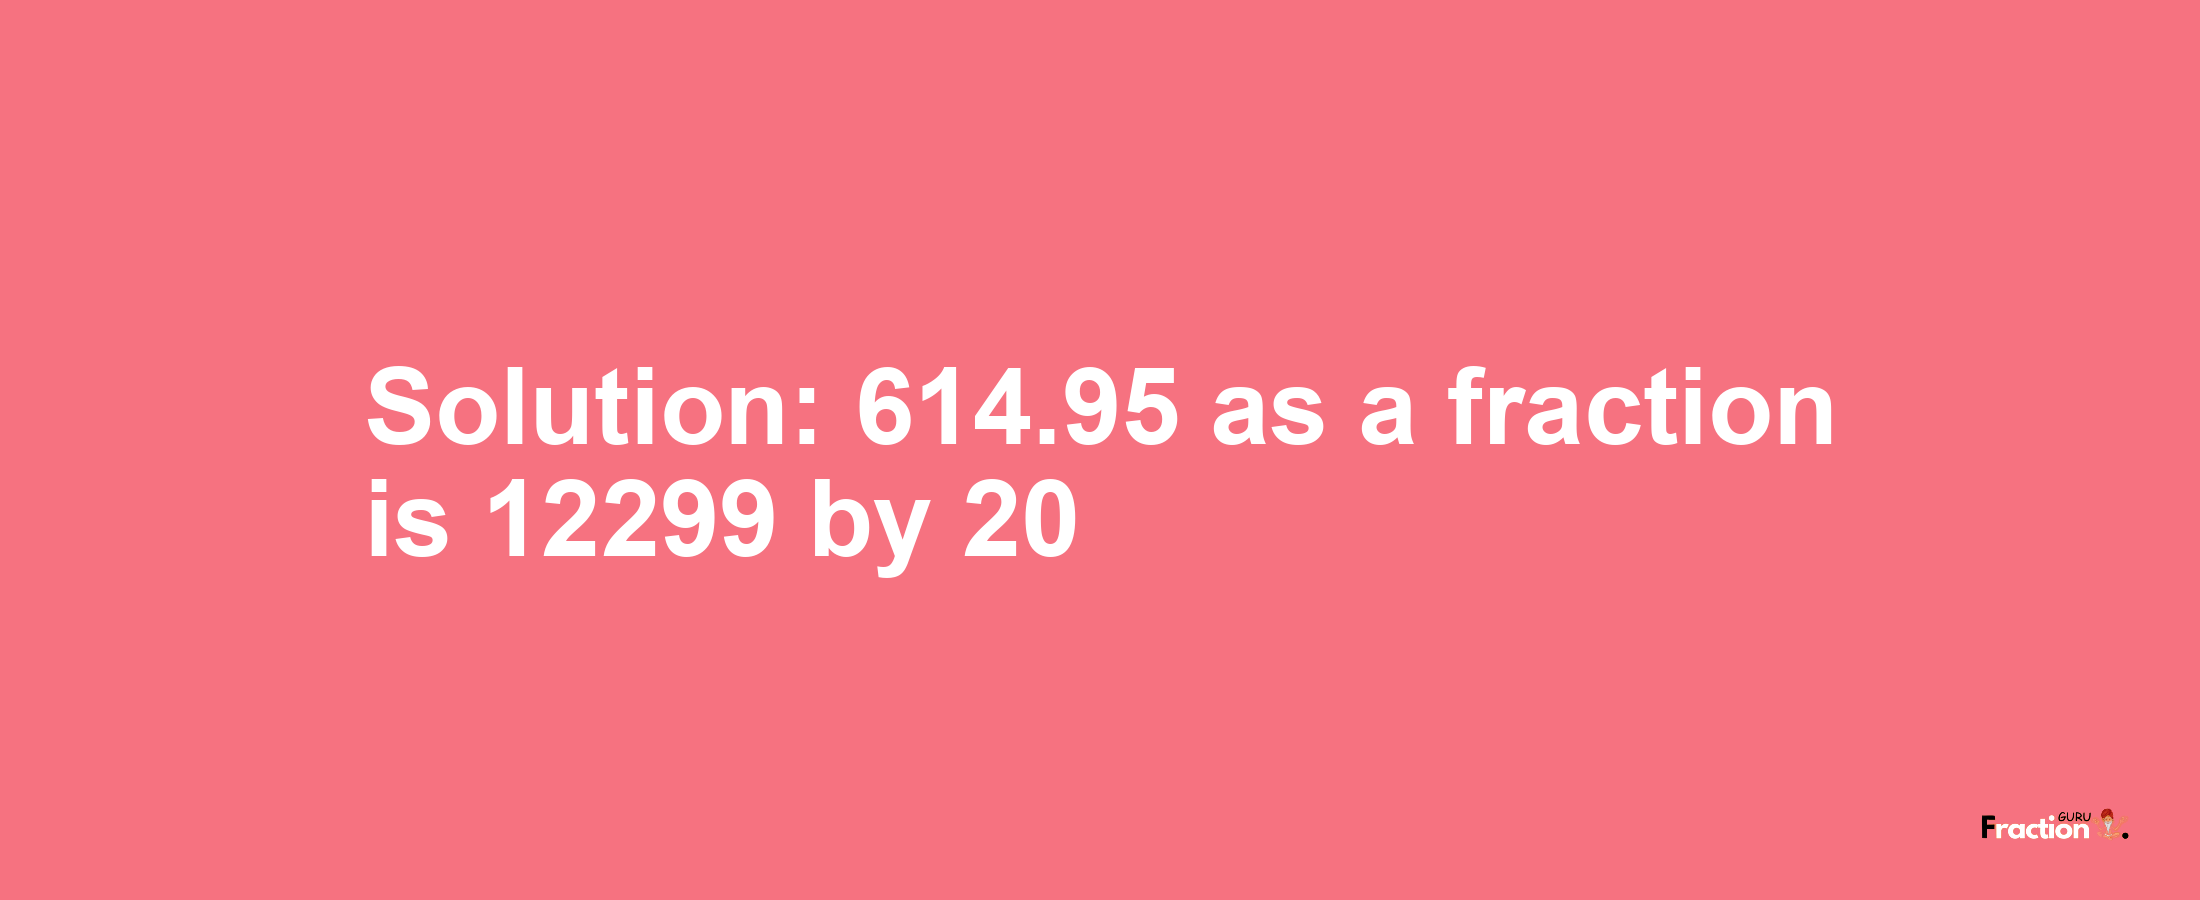 Solution:614.95 as a fraction is 12299/20